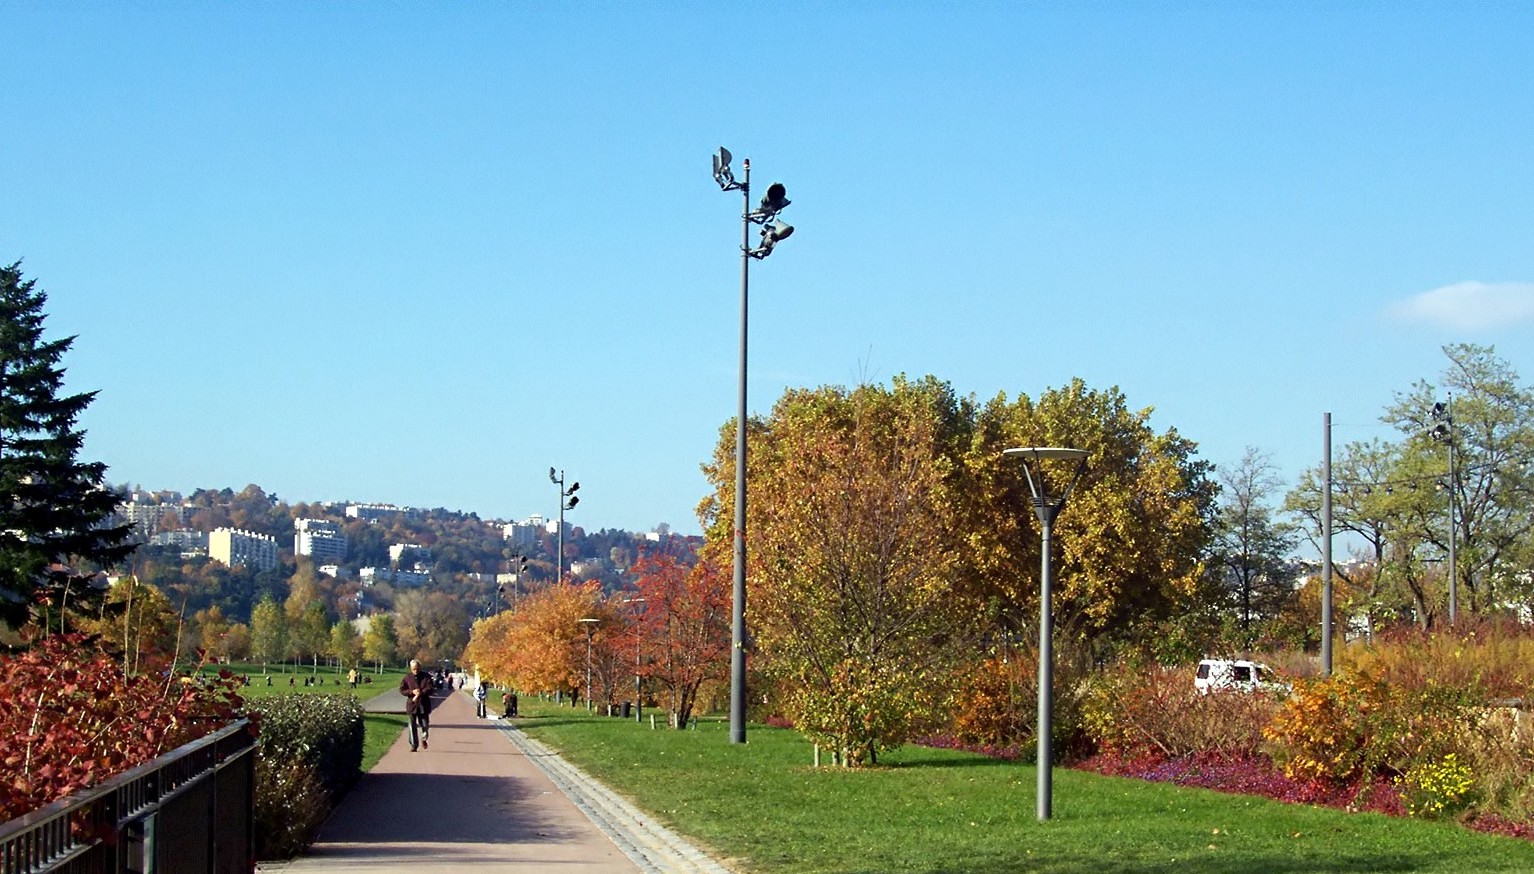 Ready to run in Gerland? Let us guide you along the banks of the Rhône River. Enjoy your run!